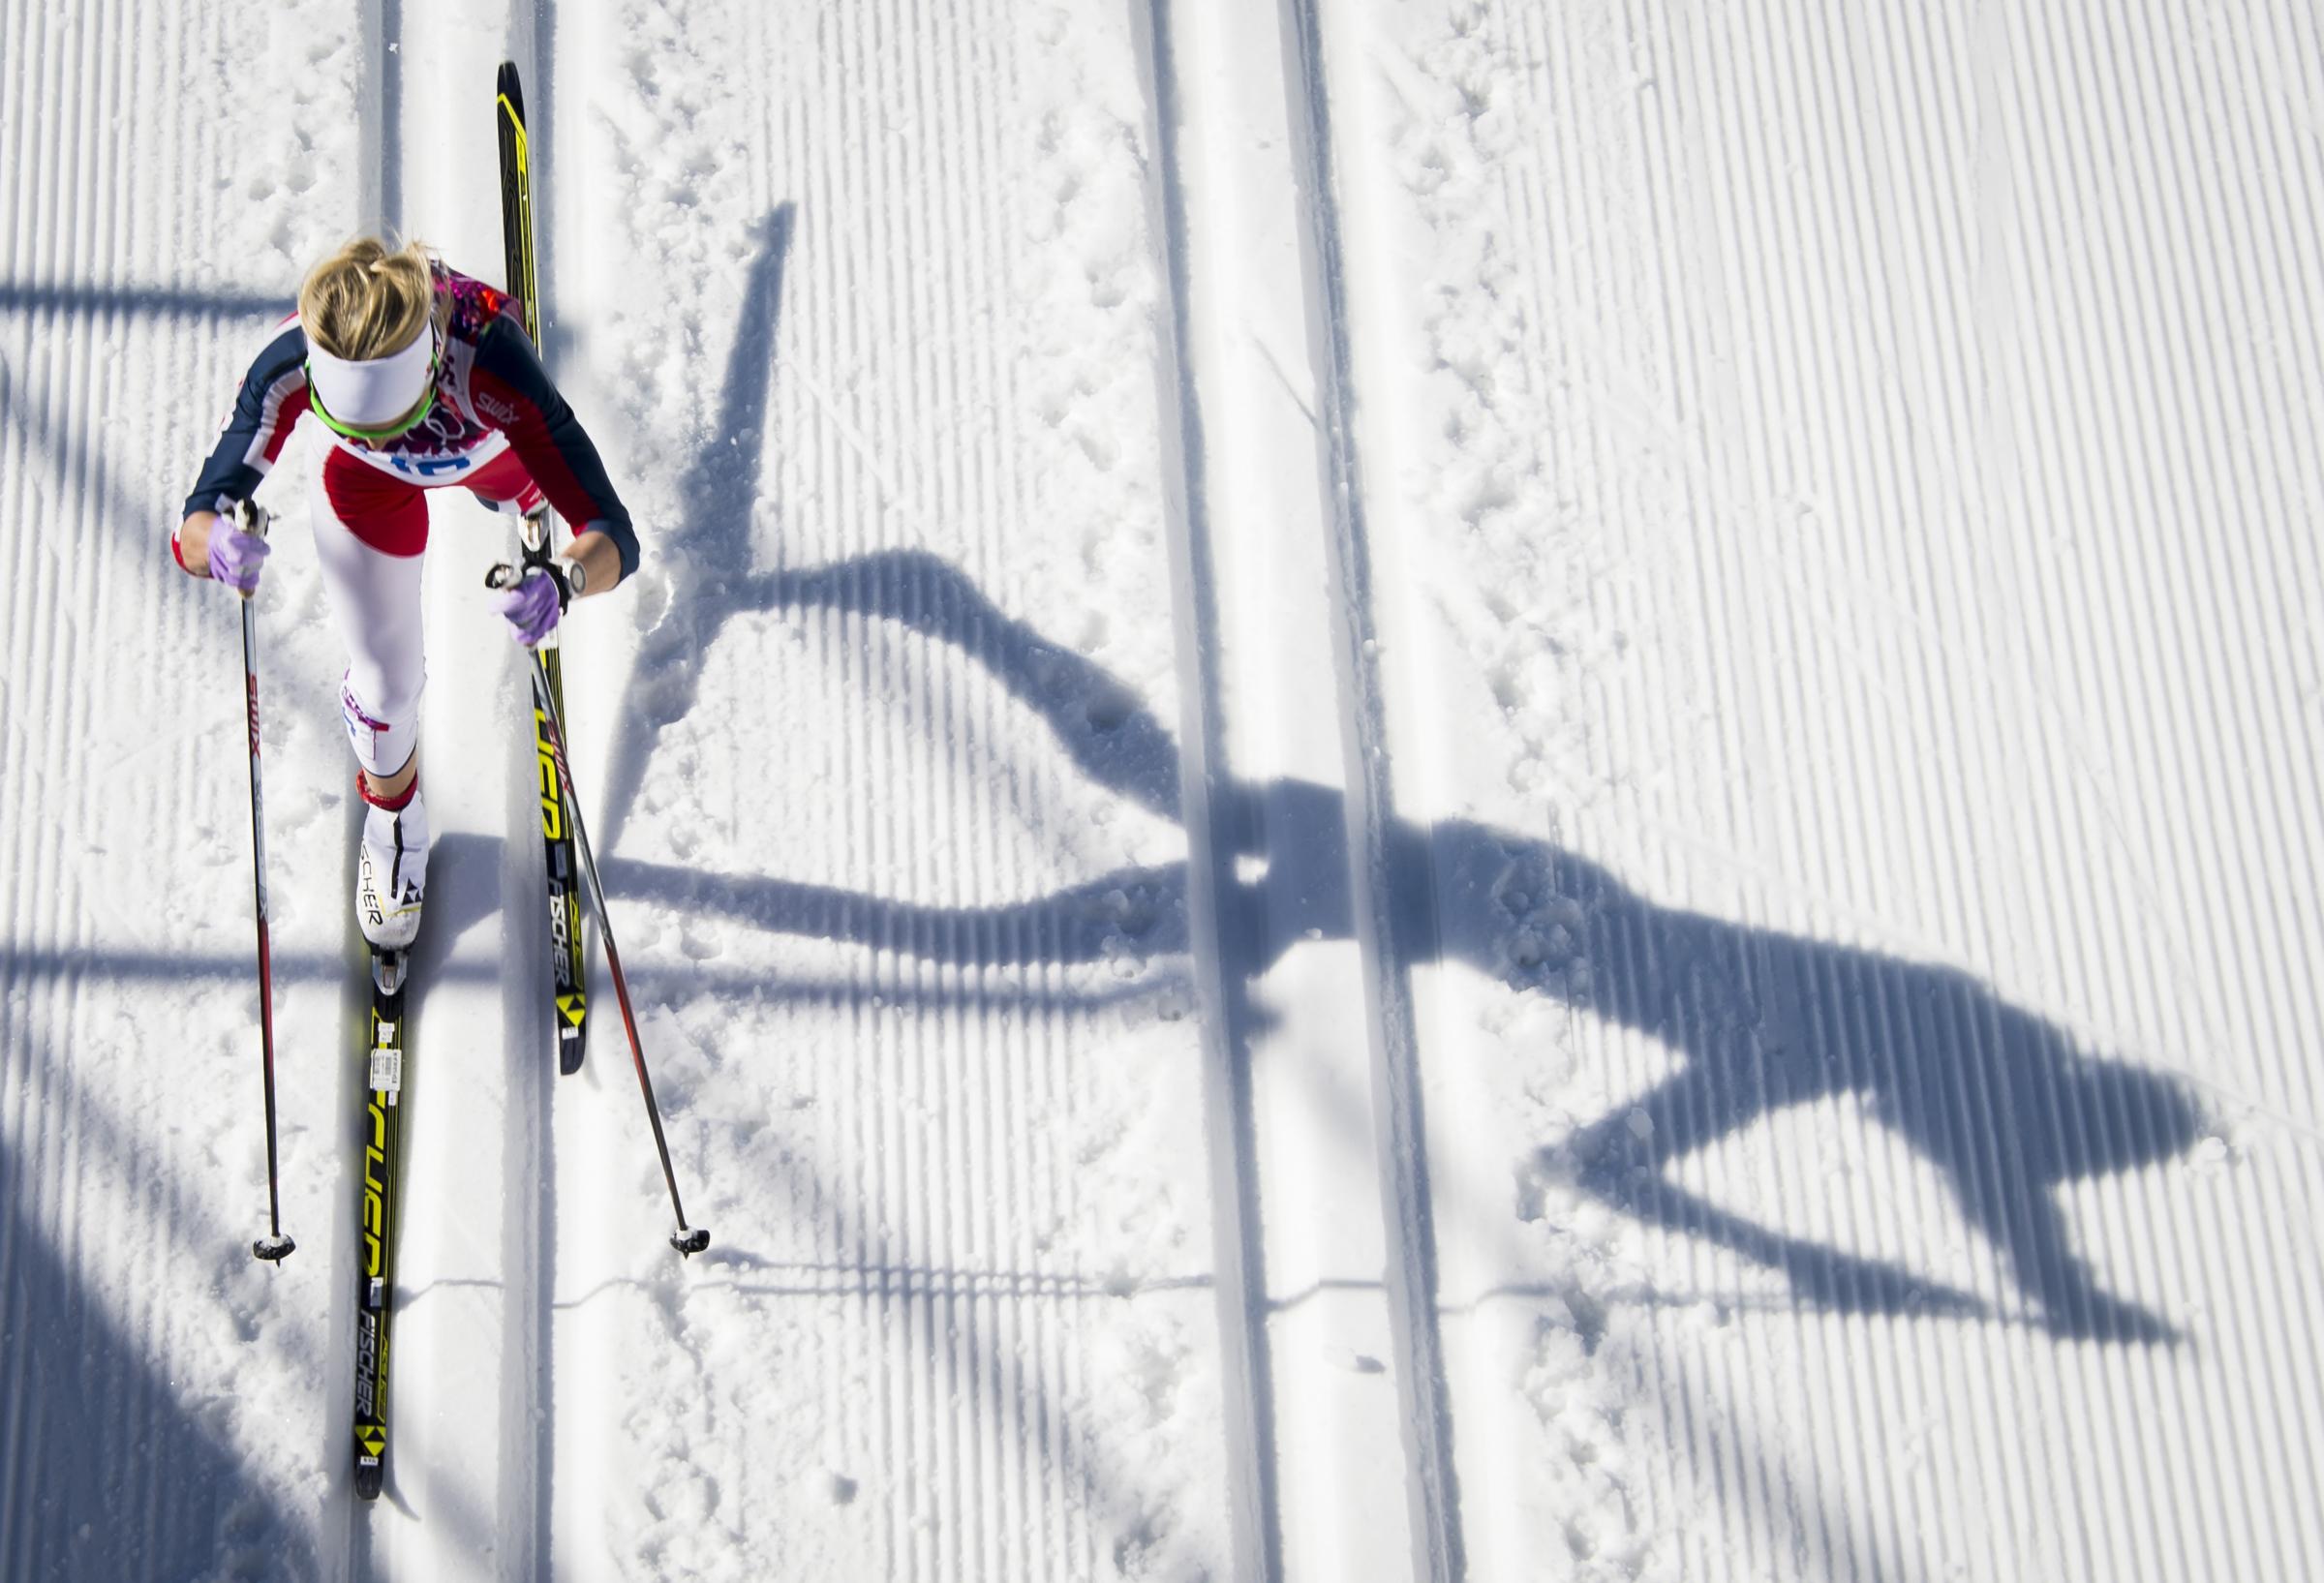 Norway's Therese Johaug competes to win bronze in the Women's Cross-Country Skiing 10km Classic during the Sochi Winter Olympics Feb. 13, 2014 in Rosa Khutor near Sochi.